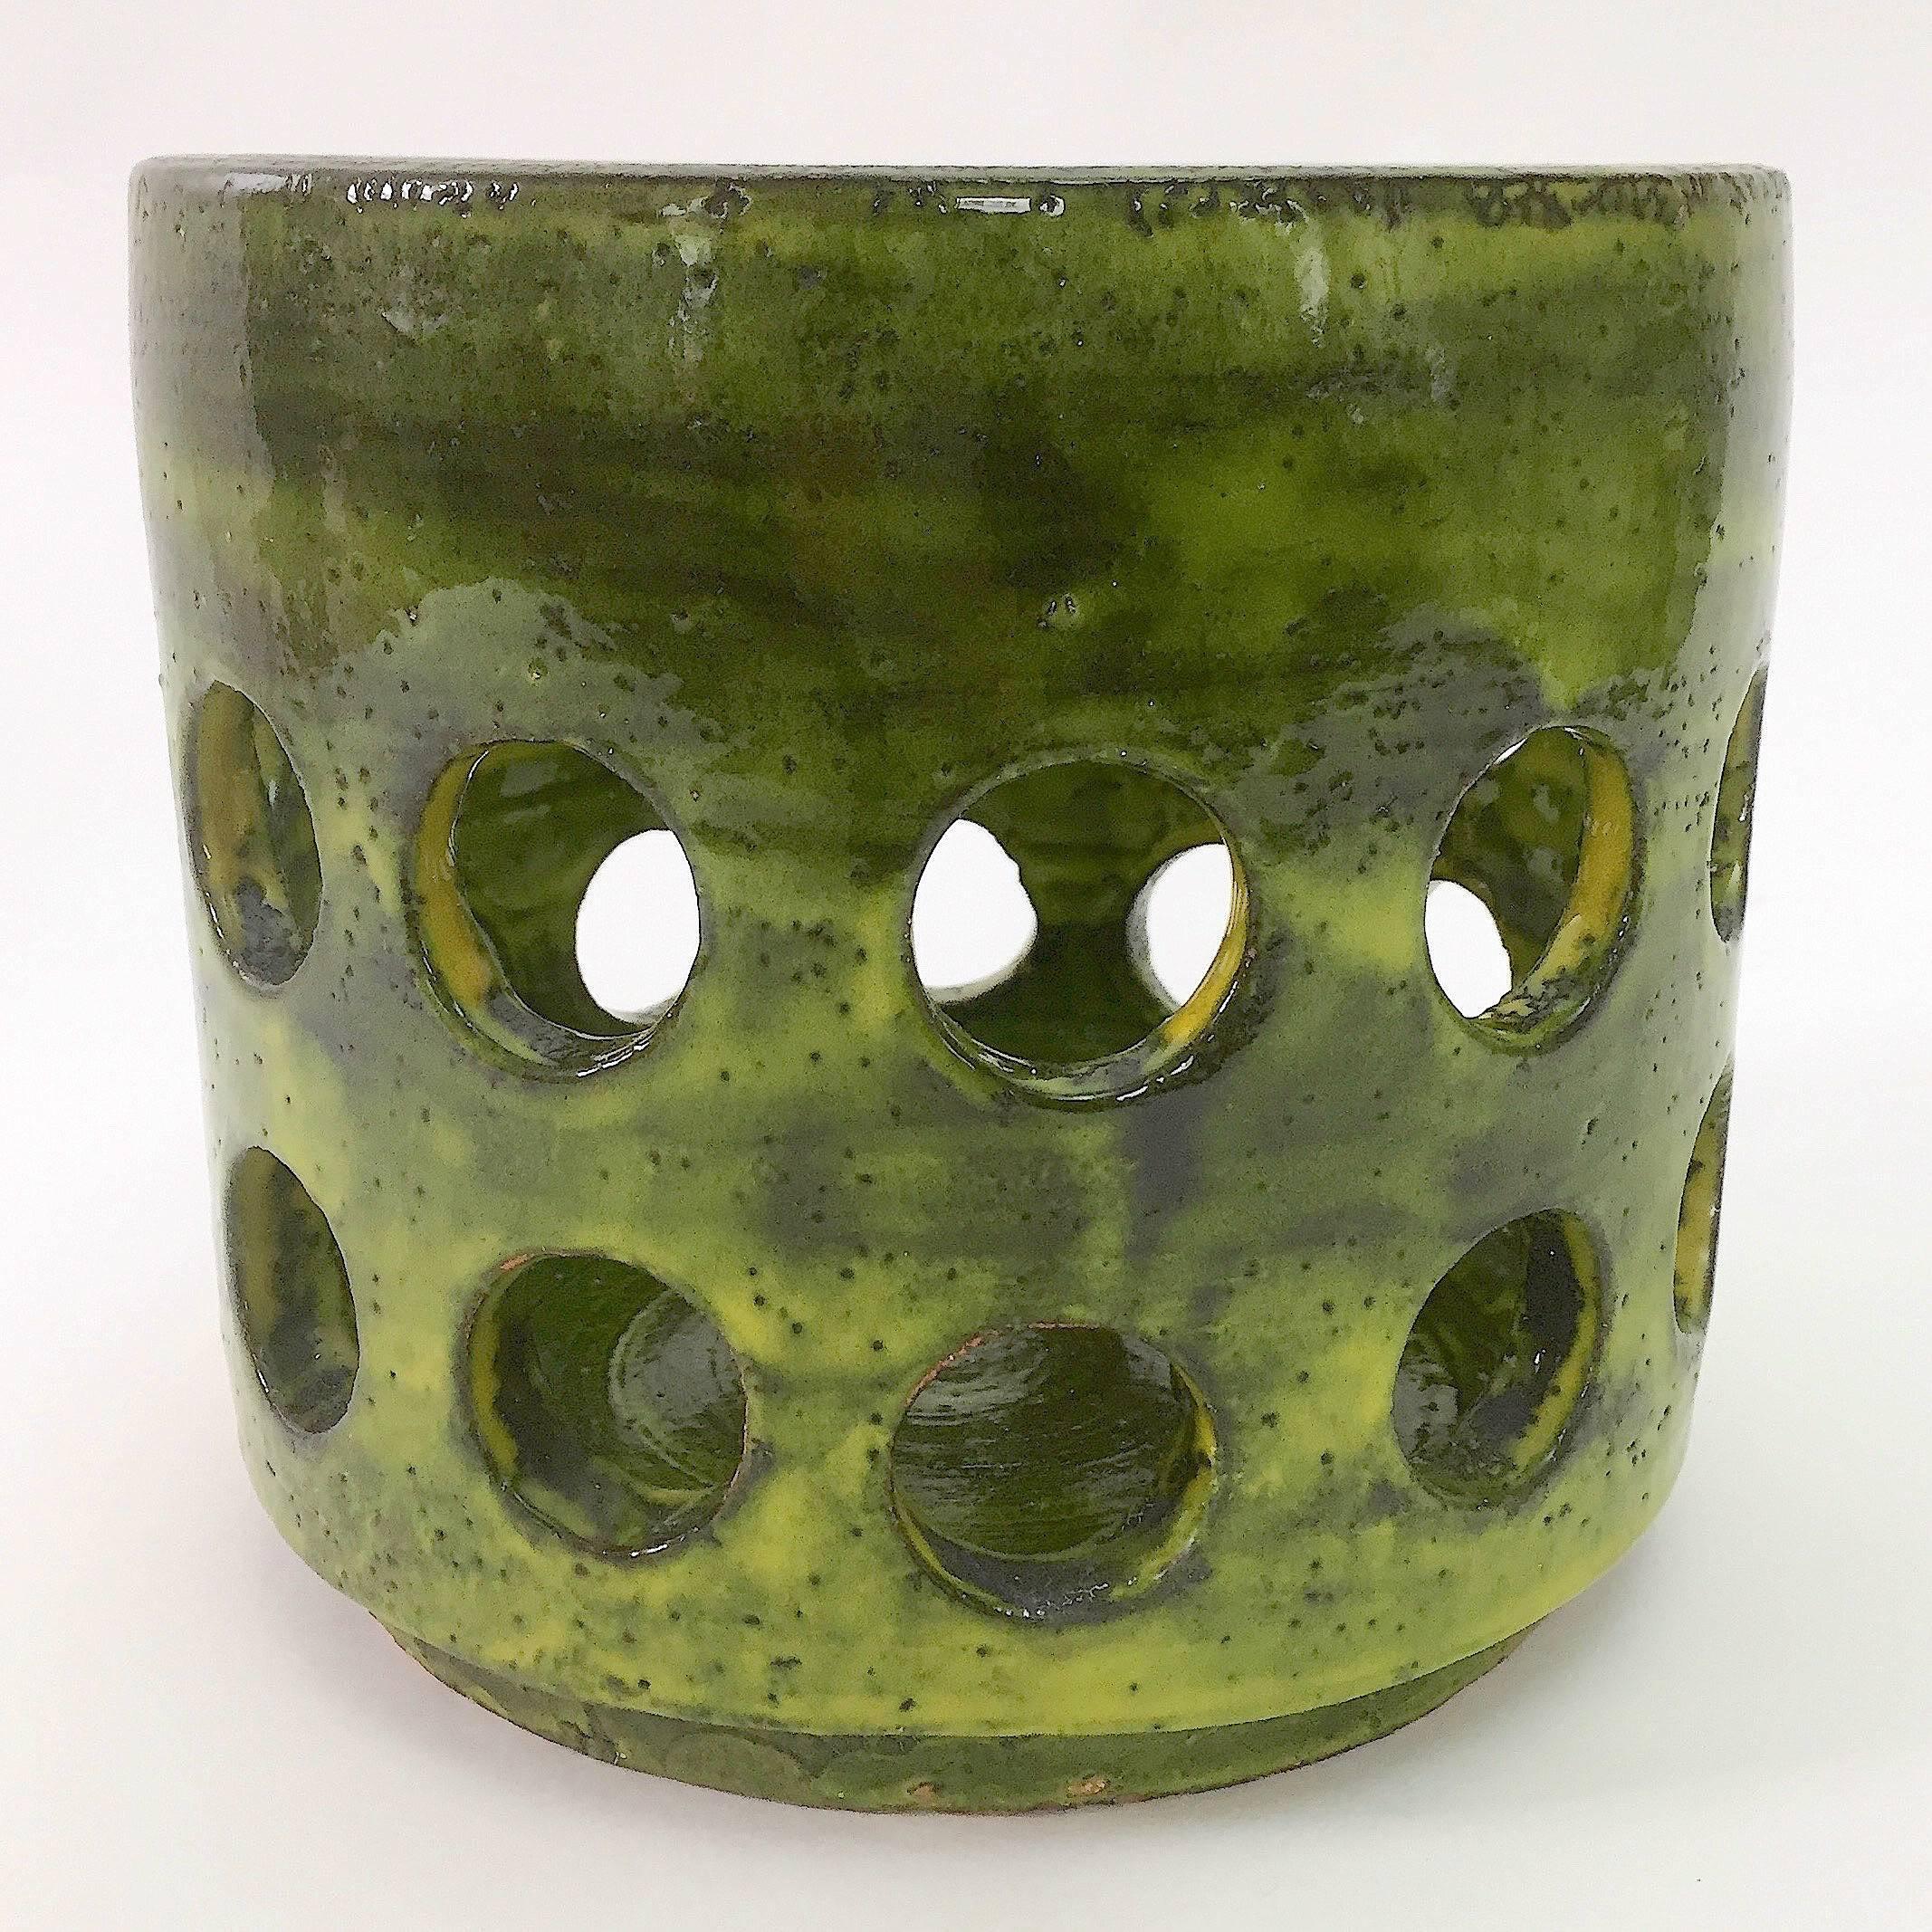 Important cylinder vase or cachepot, ceramic glazed in shades of shiny green, and decorated with perforated geometric circles.

Rare artwork designed by the artist from the collection named Engrenages.
This piece is unsigned but referenced in the